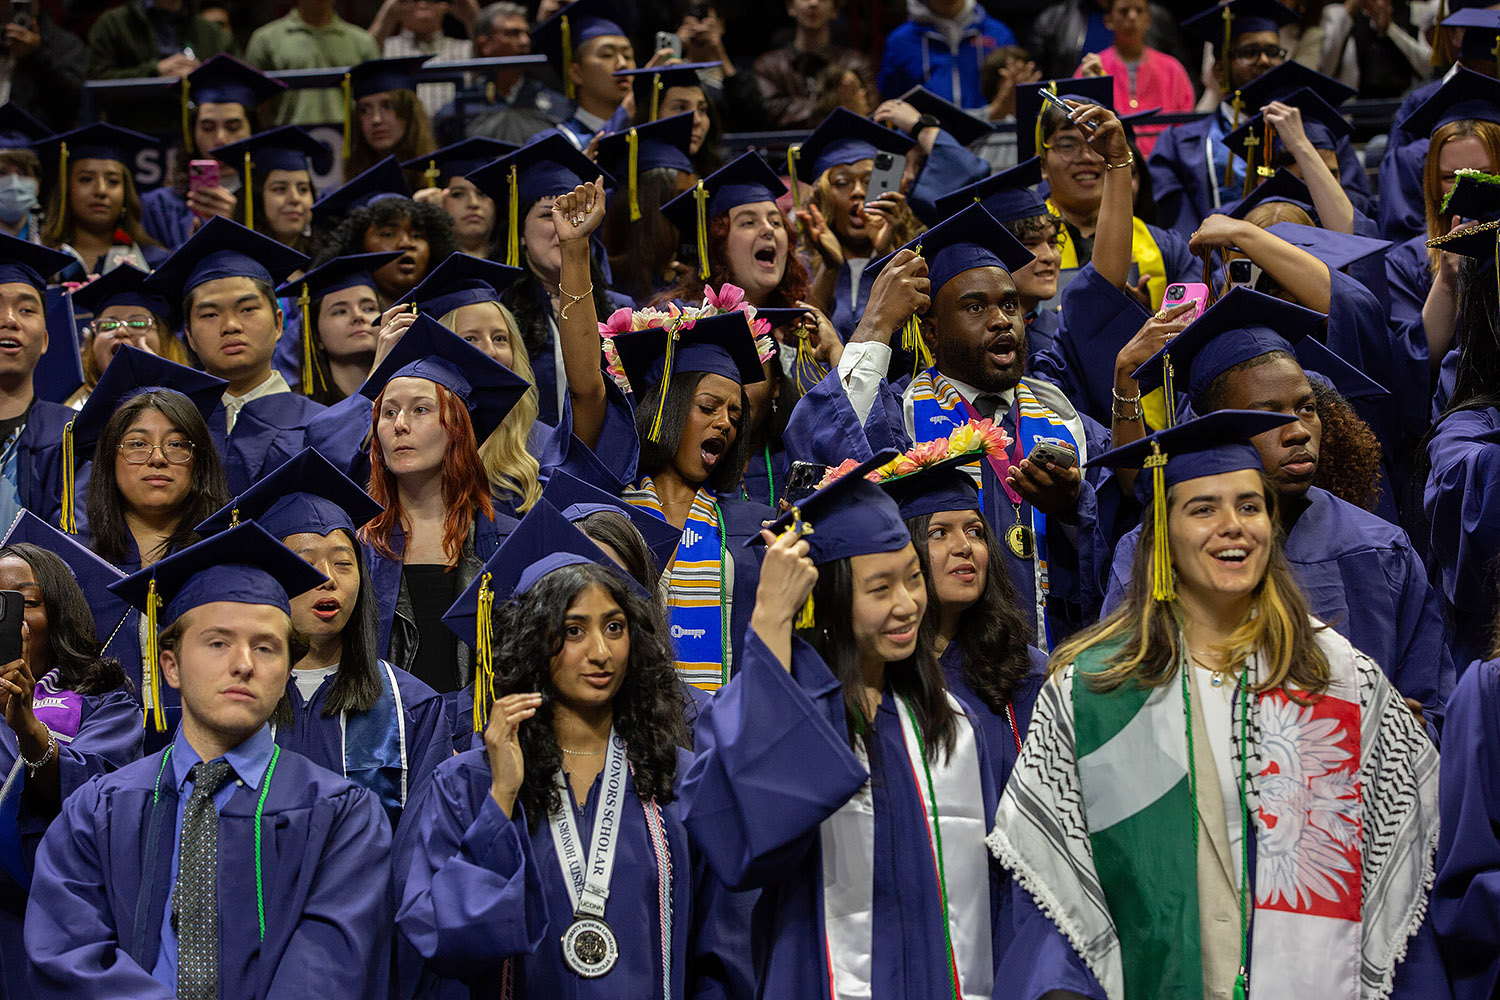 Students celebrate while turning their tassels during commencement ceremony.